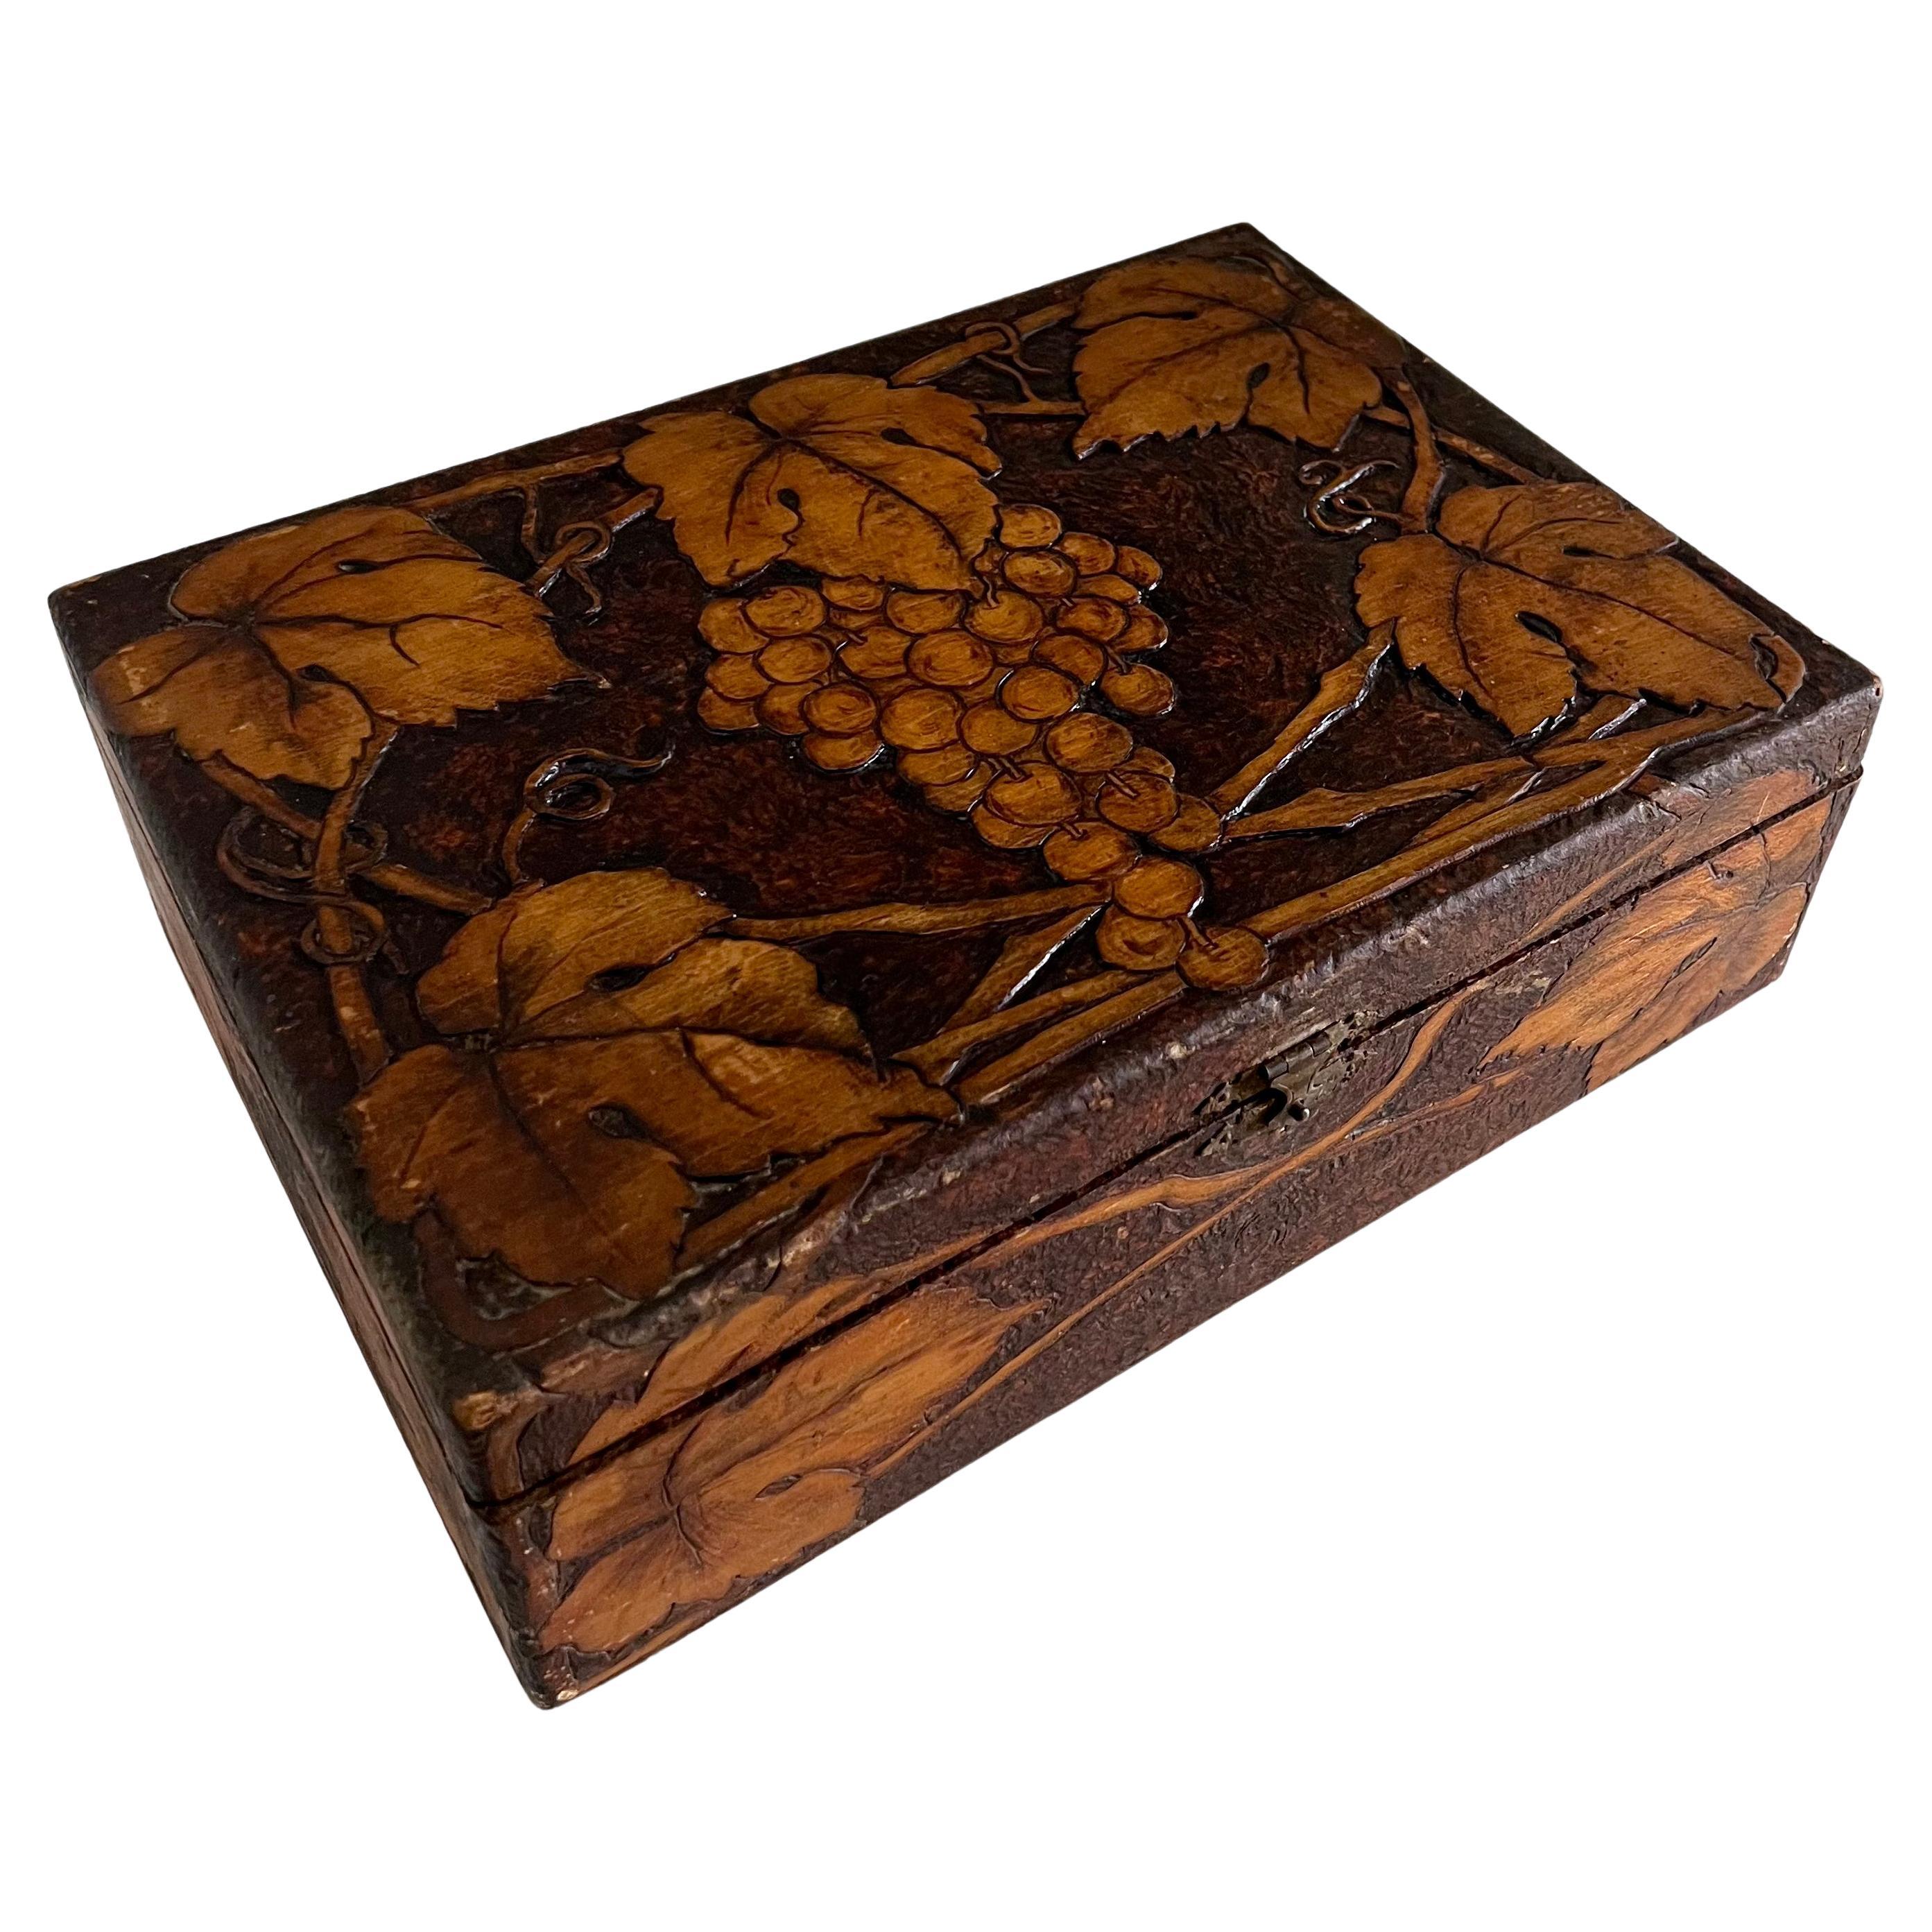 Folk Art Hand-Carved Wooden Box with Grapes and Leaves